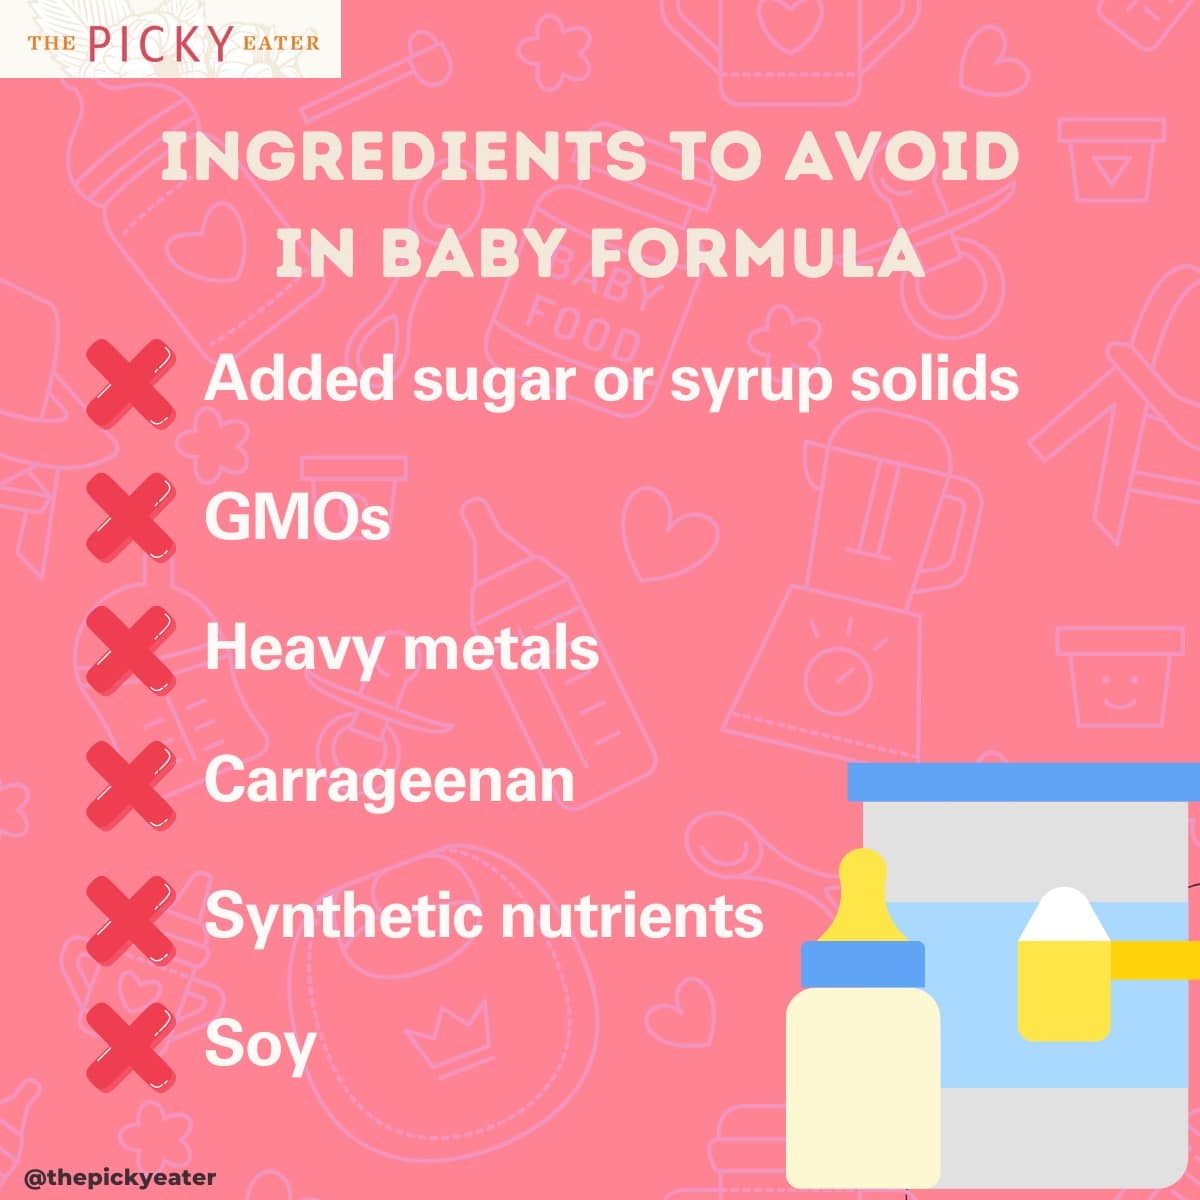 Graphic describing ingredients to avoid in baby formula.